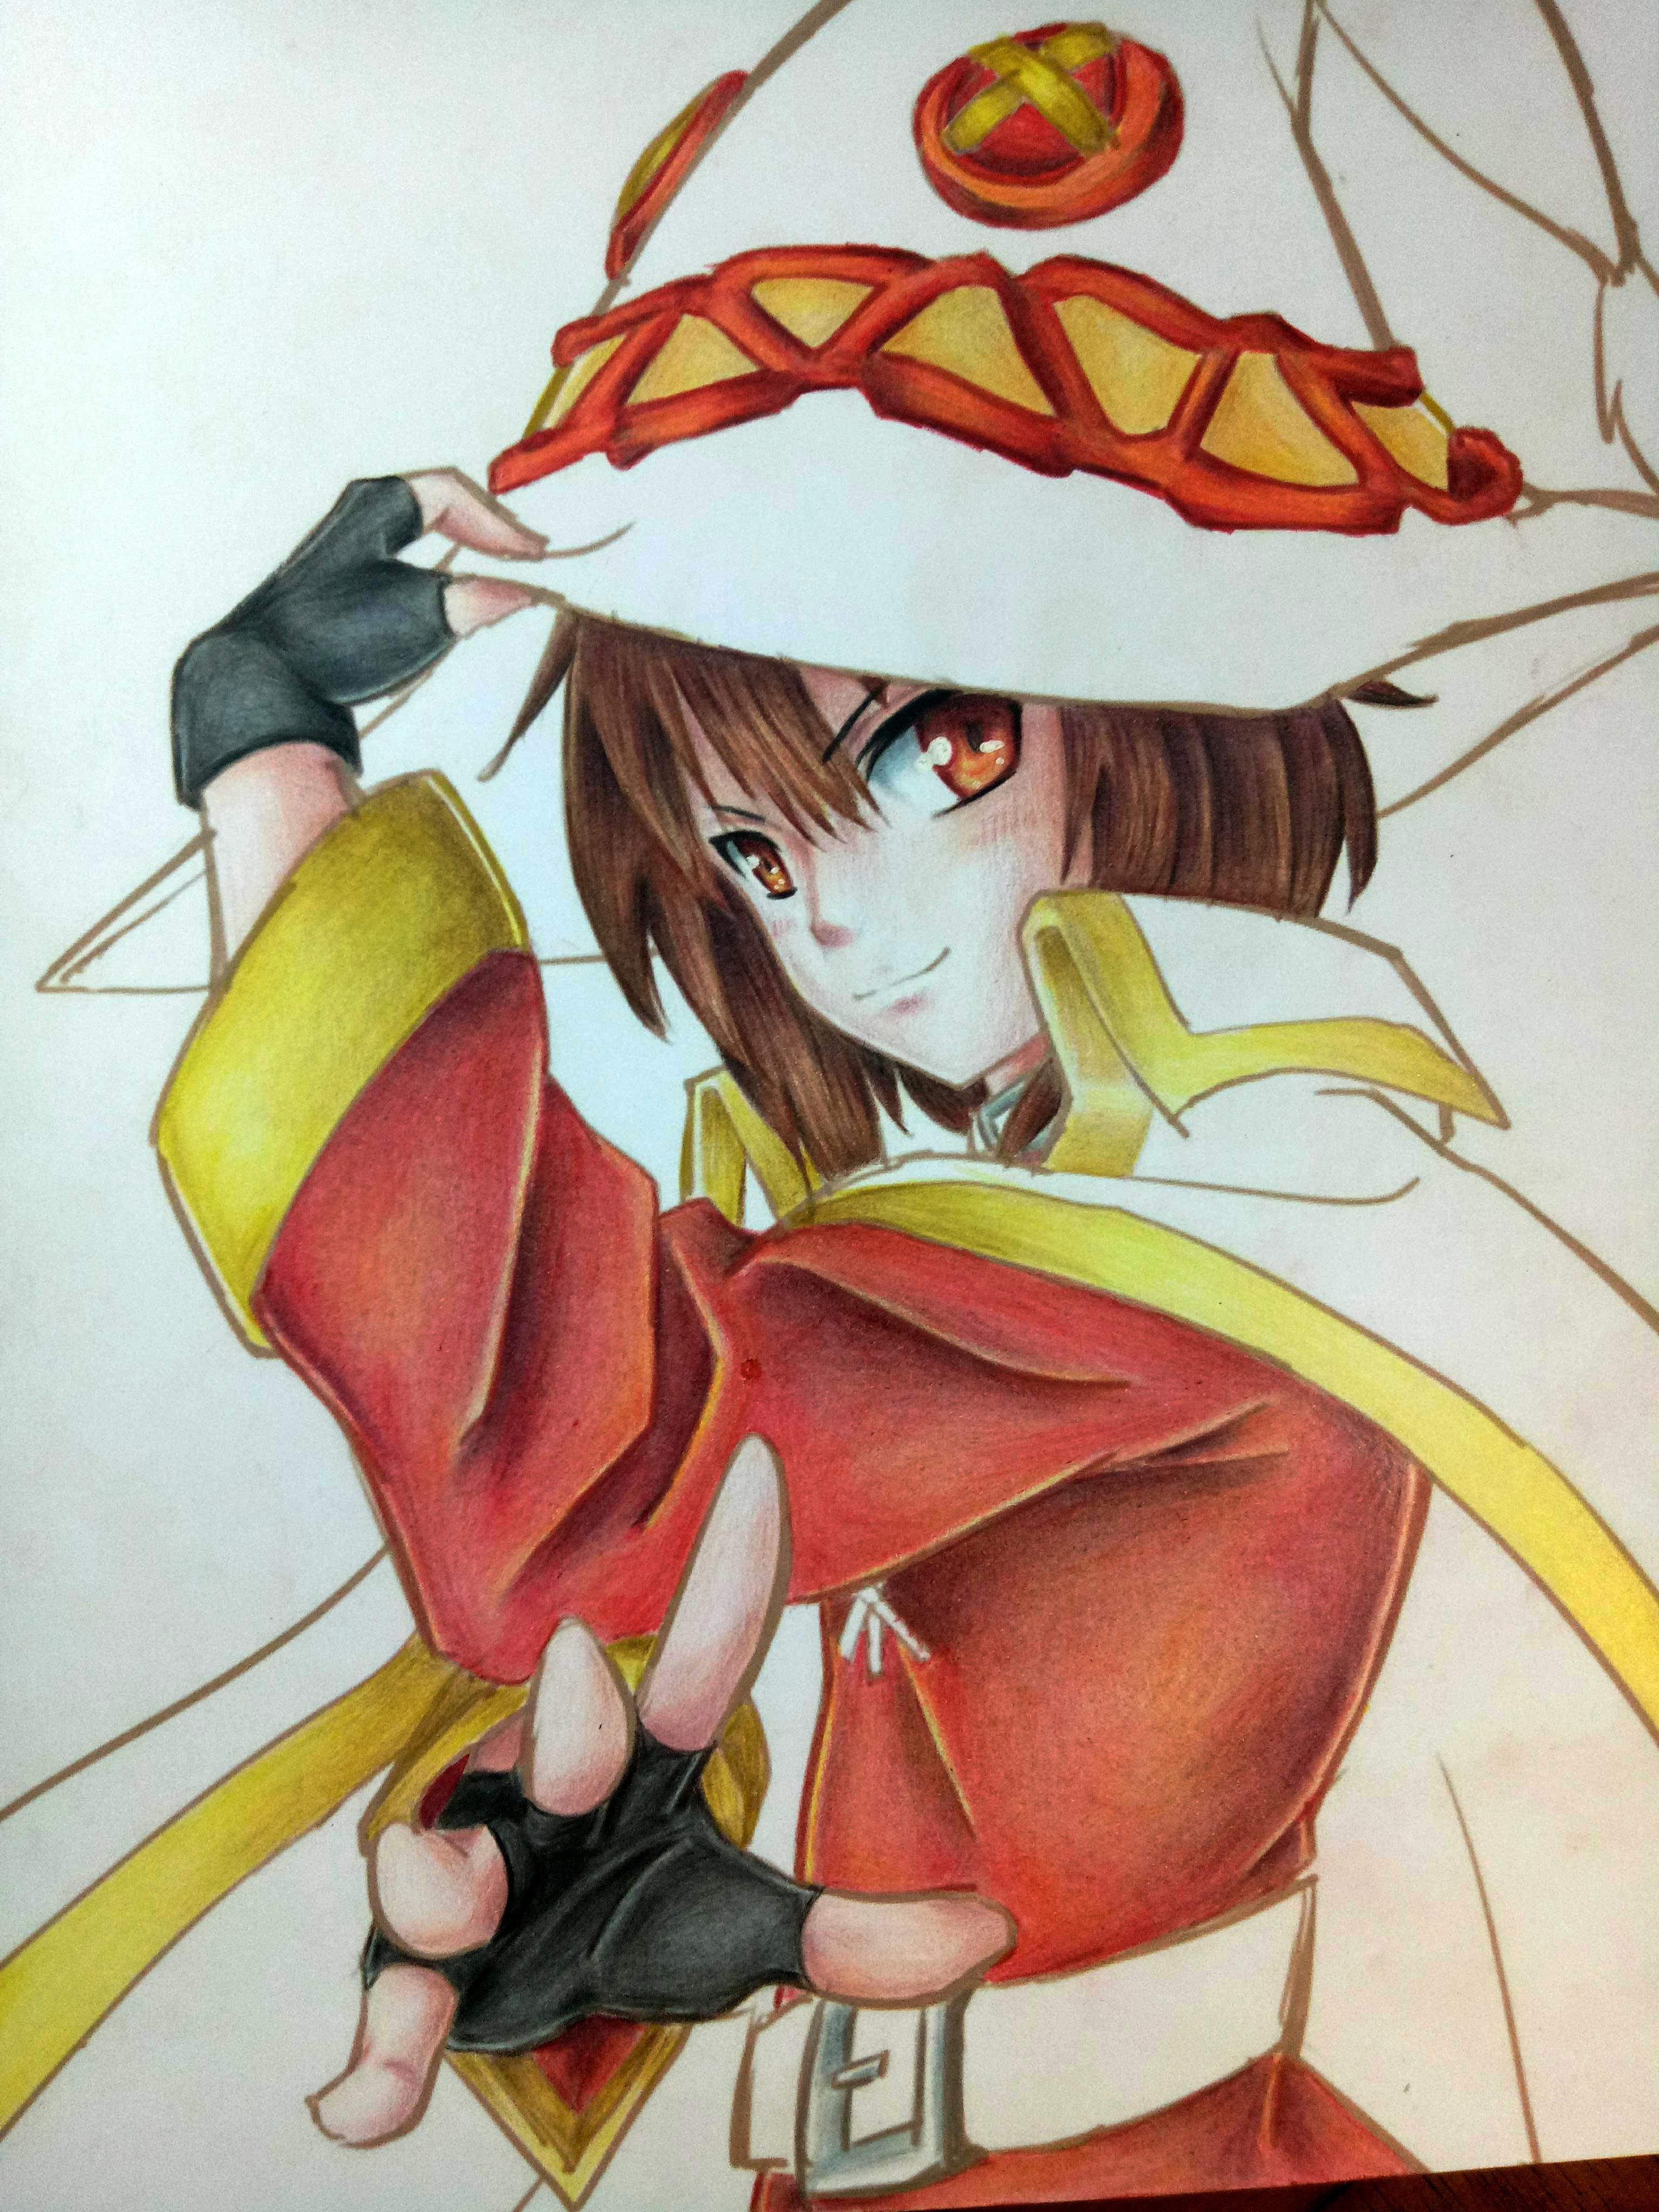 First drawing in my new sketchbook (made with crayola colored pencils) : r/ anime